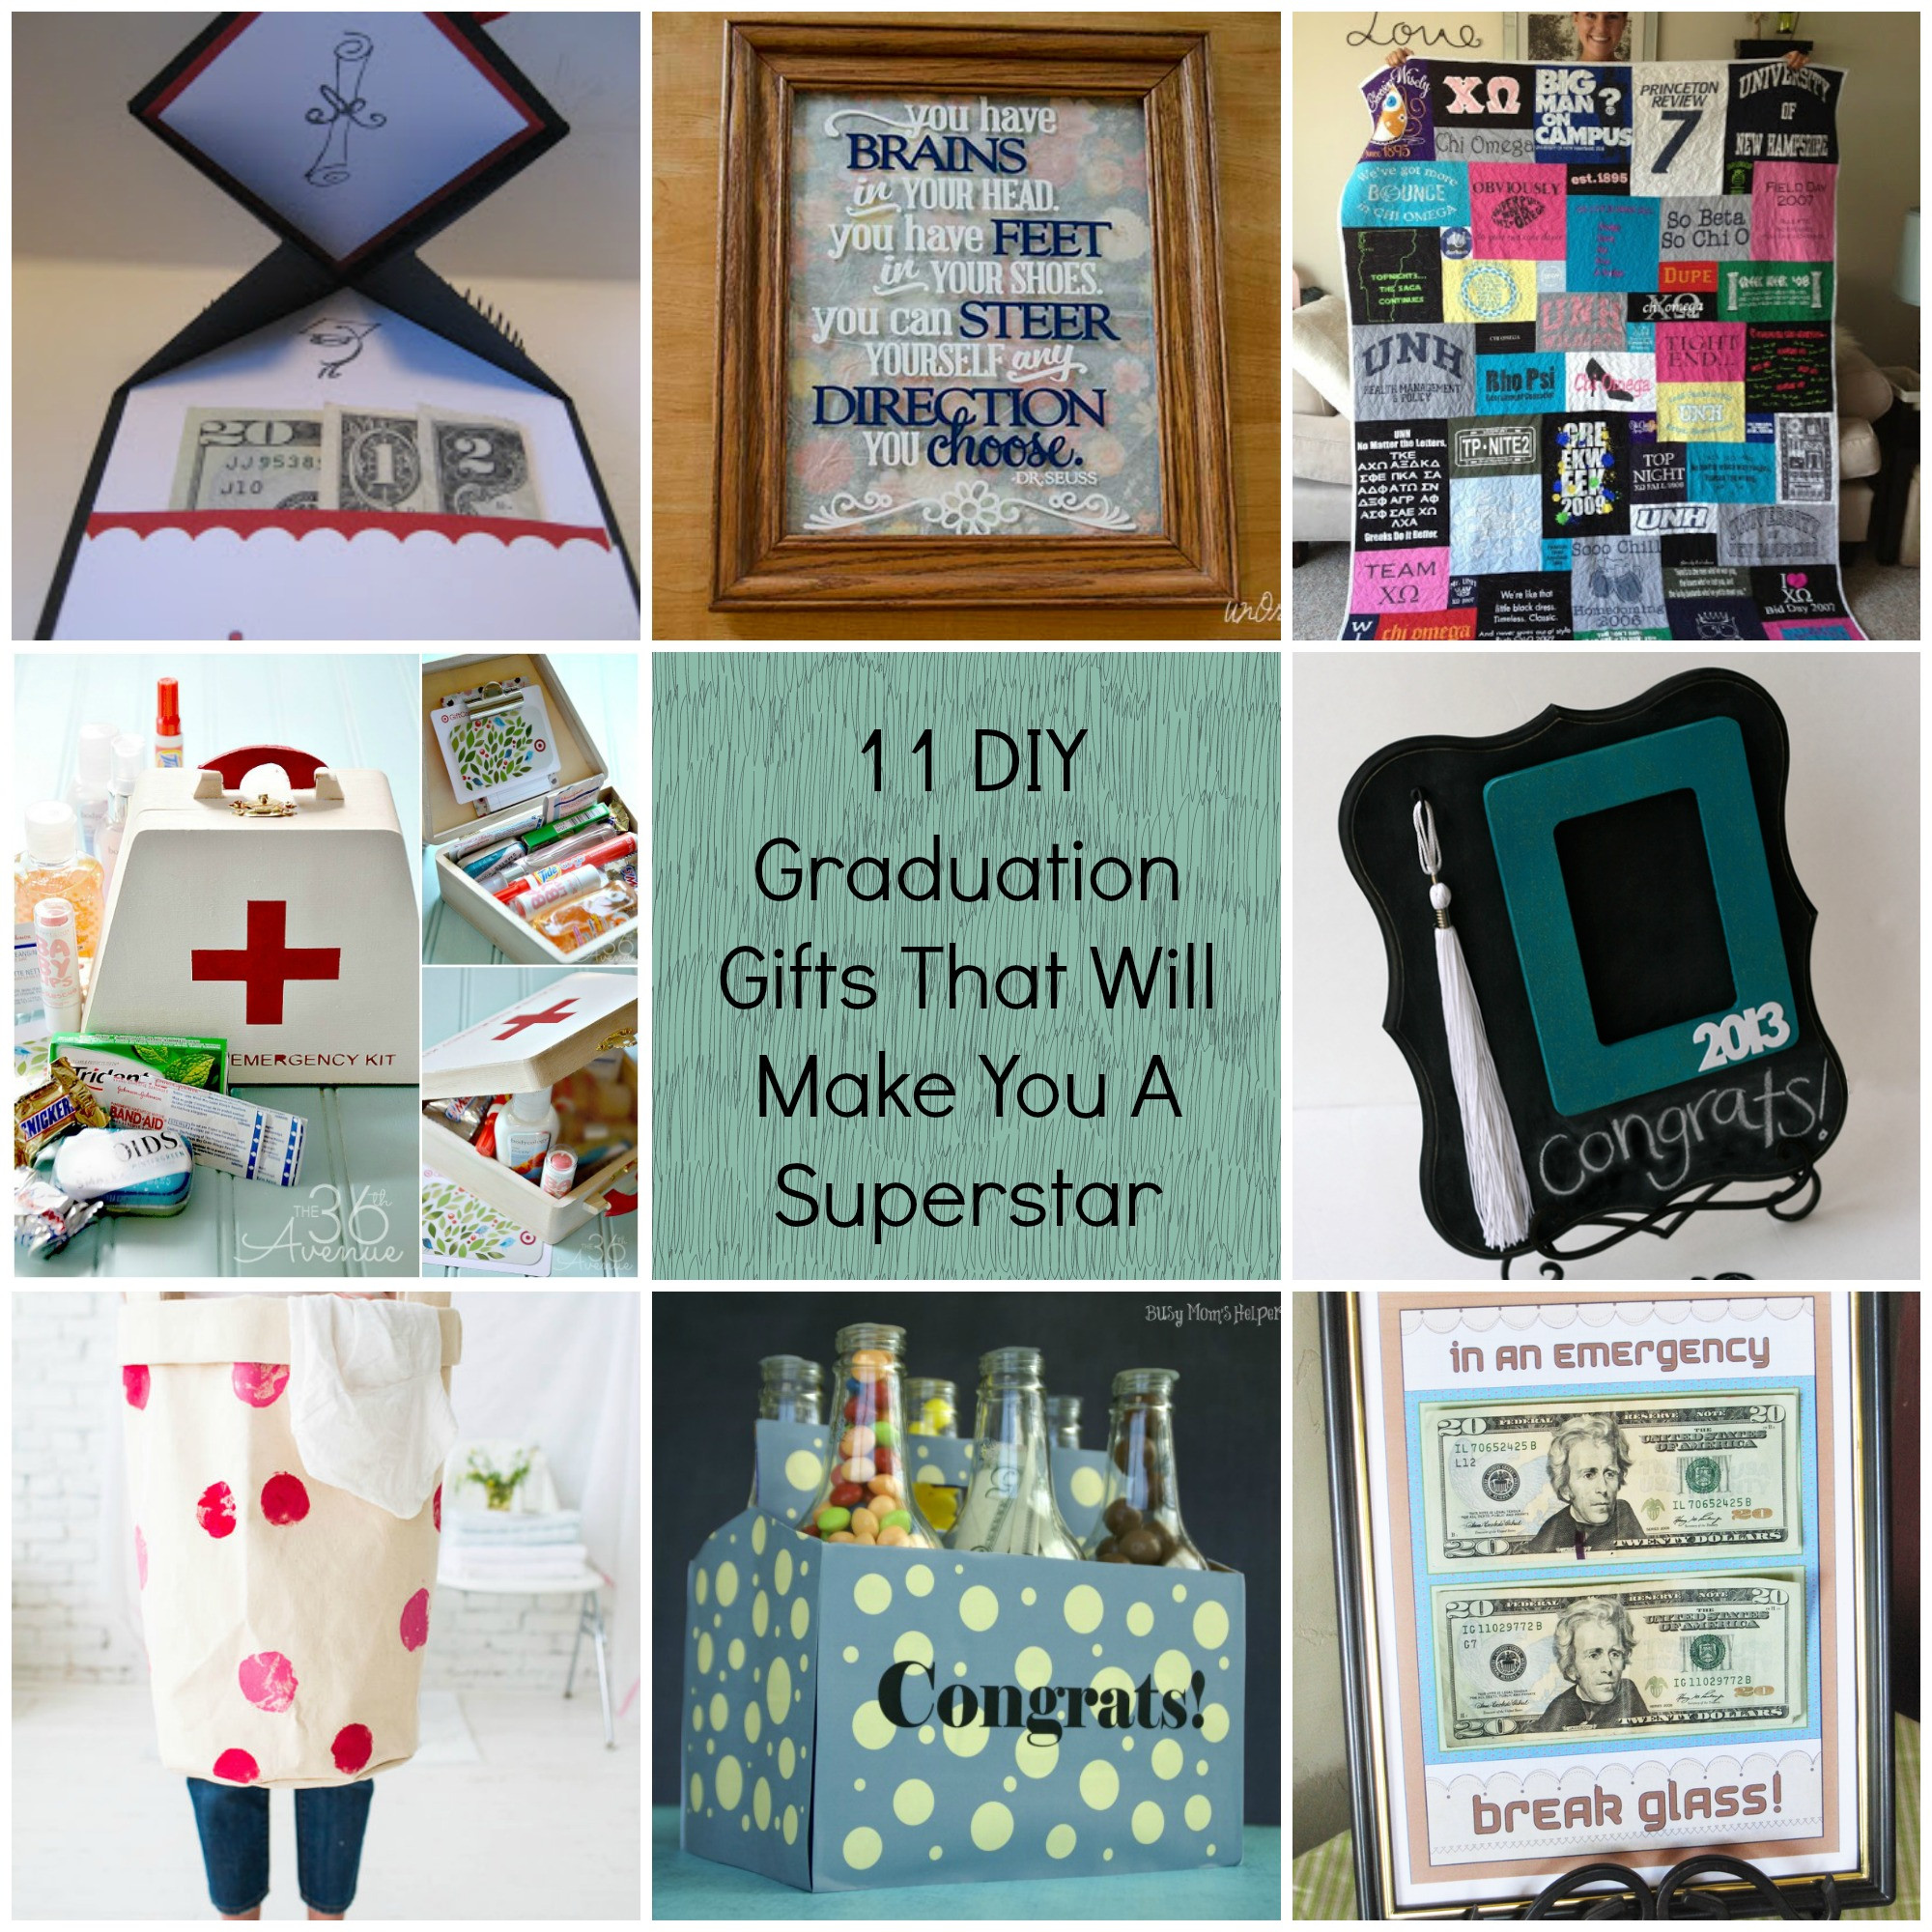 Gift Ideas For Graduation
 11 DIY Graduation Gifts That Will Make You A Superstar